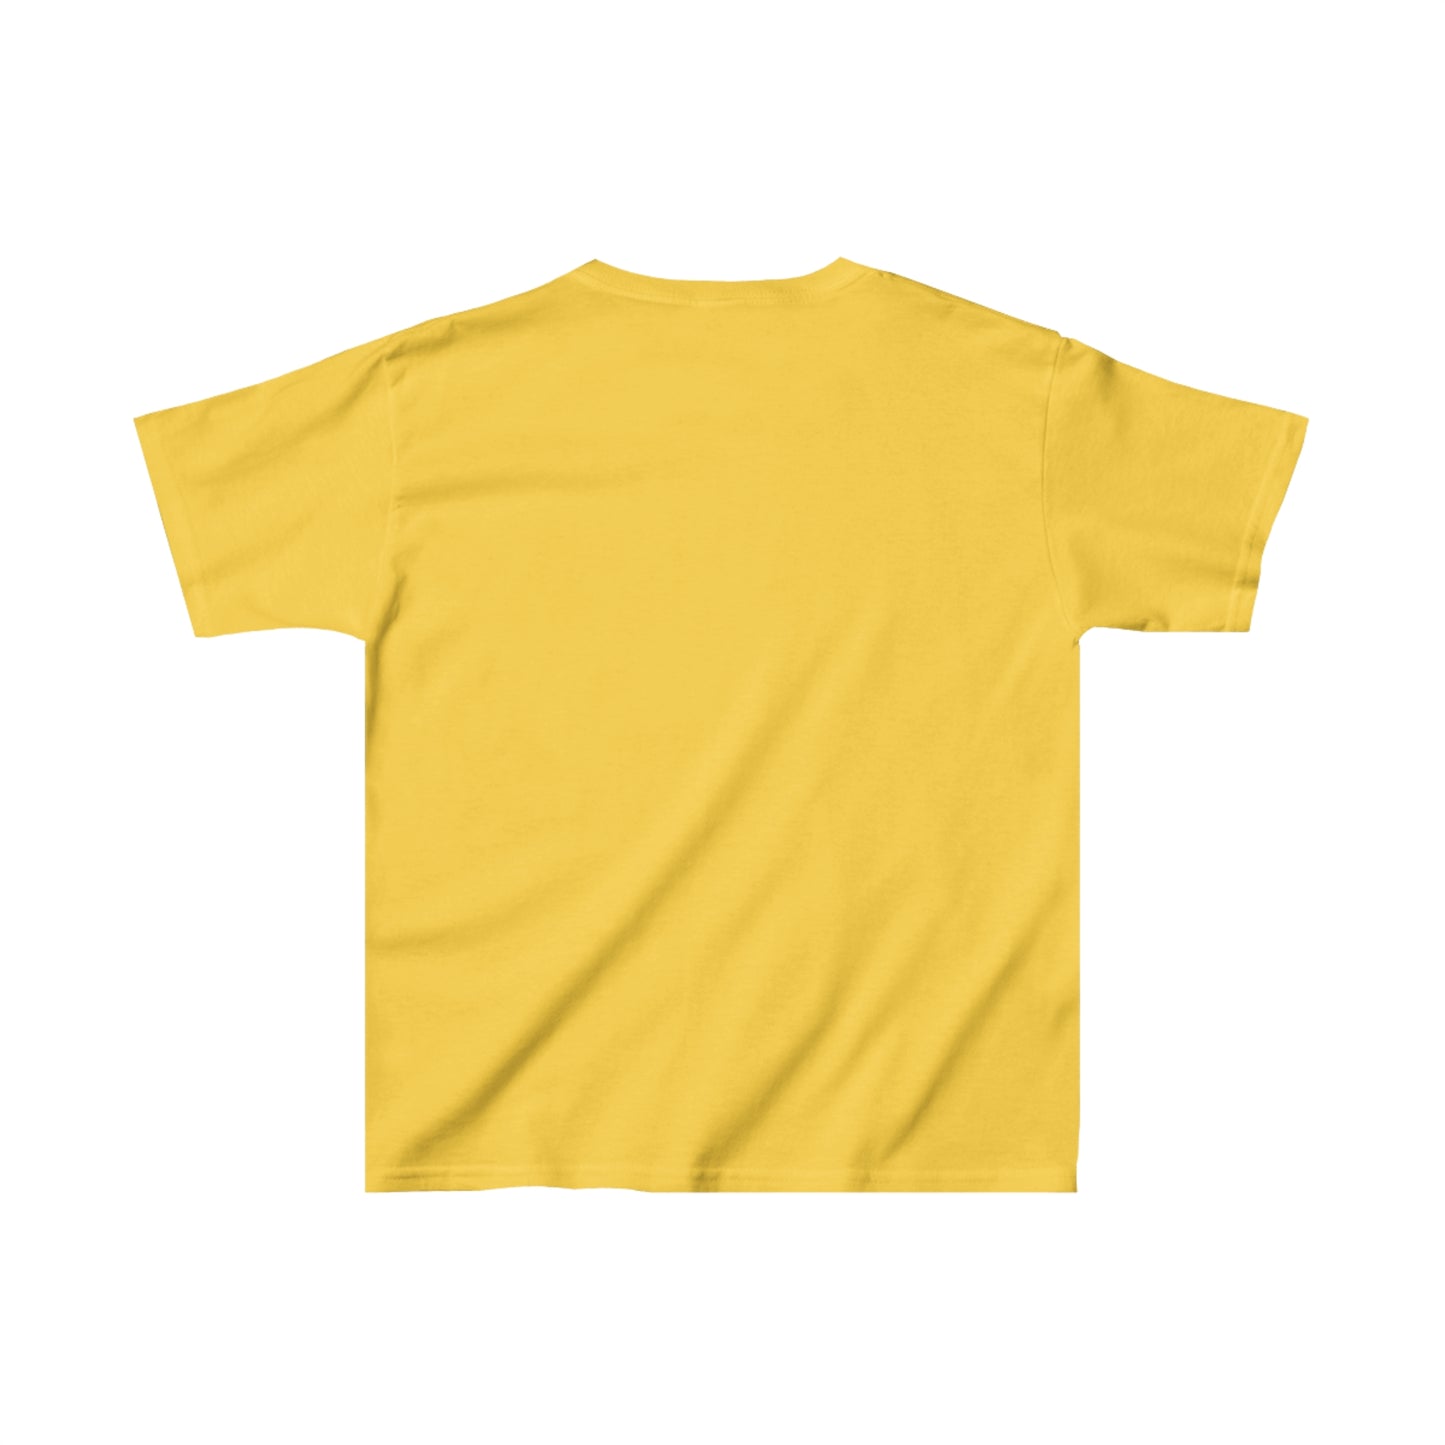 Youth HOOKED Cotton Tee